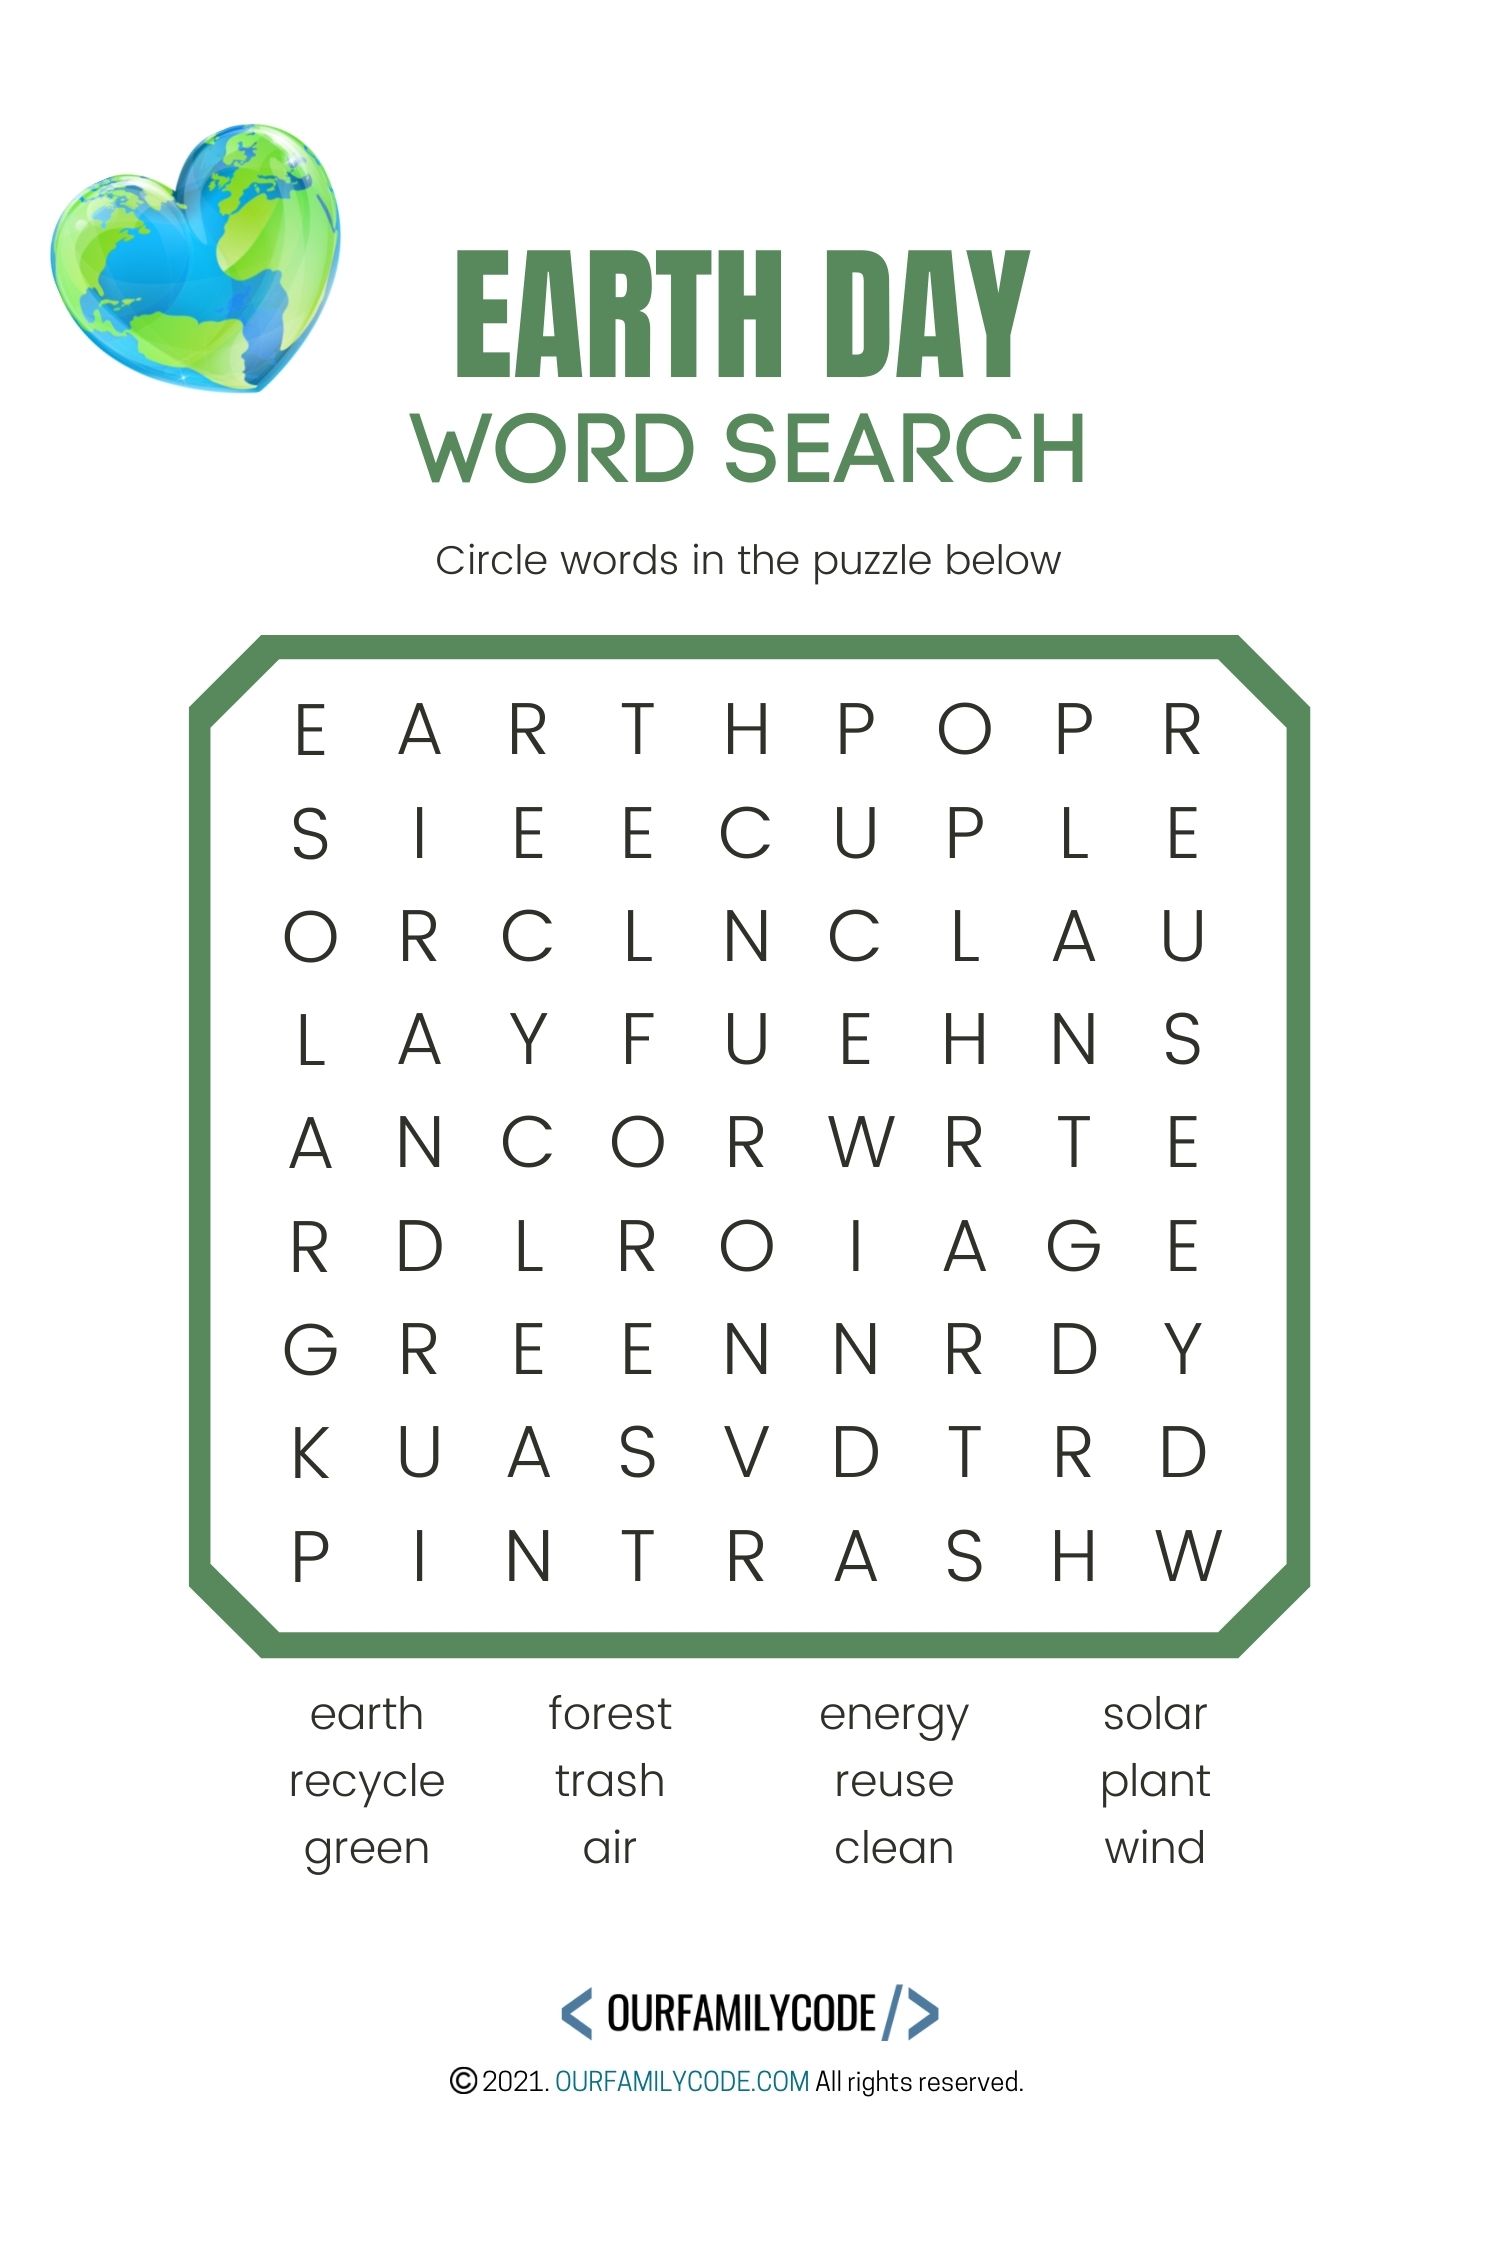 A picture of an Earth Day easy word search puzzle.